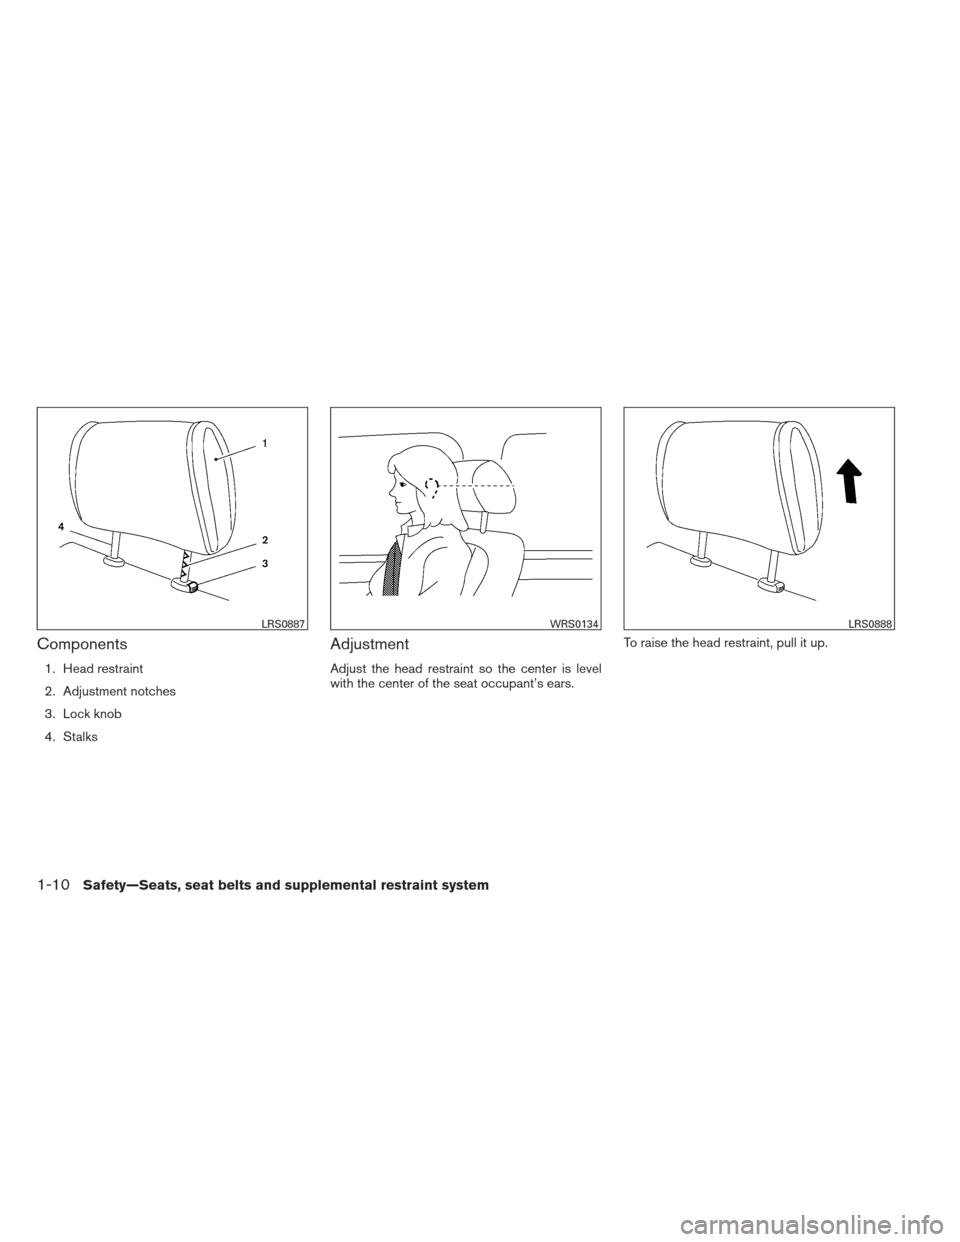 NISSAN PATHFINDER 2013 R52 / 4.G Owners Manual Components
1. Head restraint
2. Adjustment notches
3. Lock knob
4. Stalks
Adjustment
Adjust the head restraint so the center is level
with the center of the seat occupant’s ears.To raise the head re